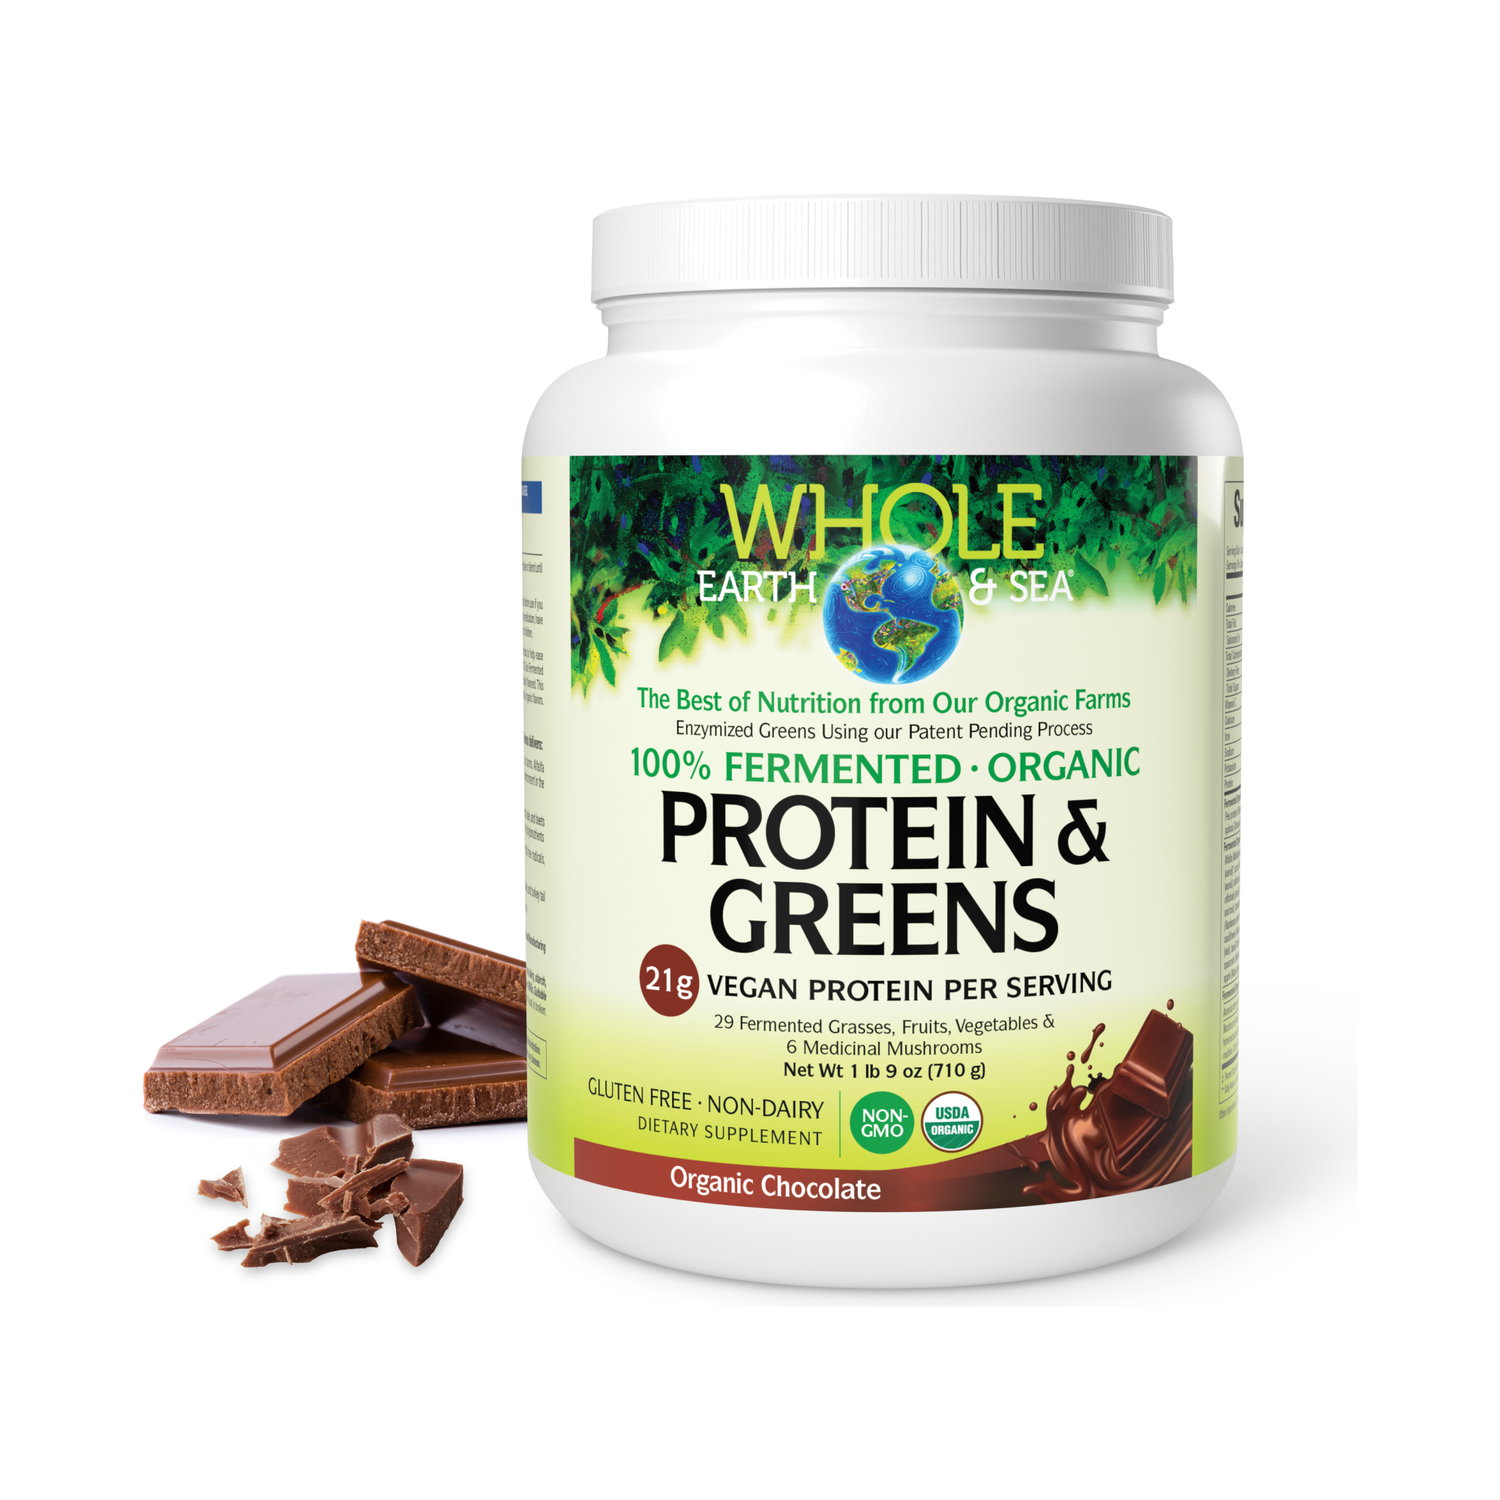 100% Fermented Organic Protein & Greens Chocolate for Whole Earth & Sea® |variant|hi-res|35535U